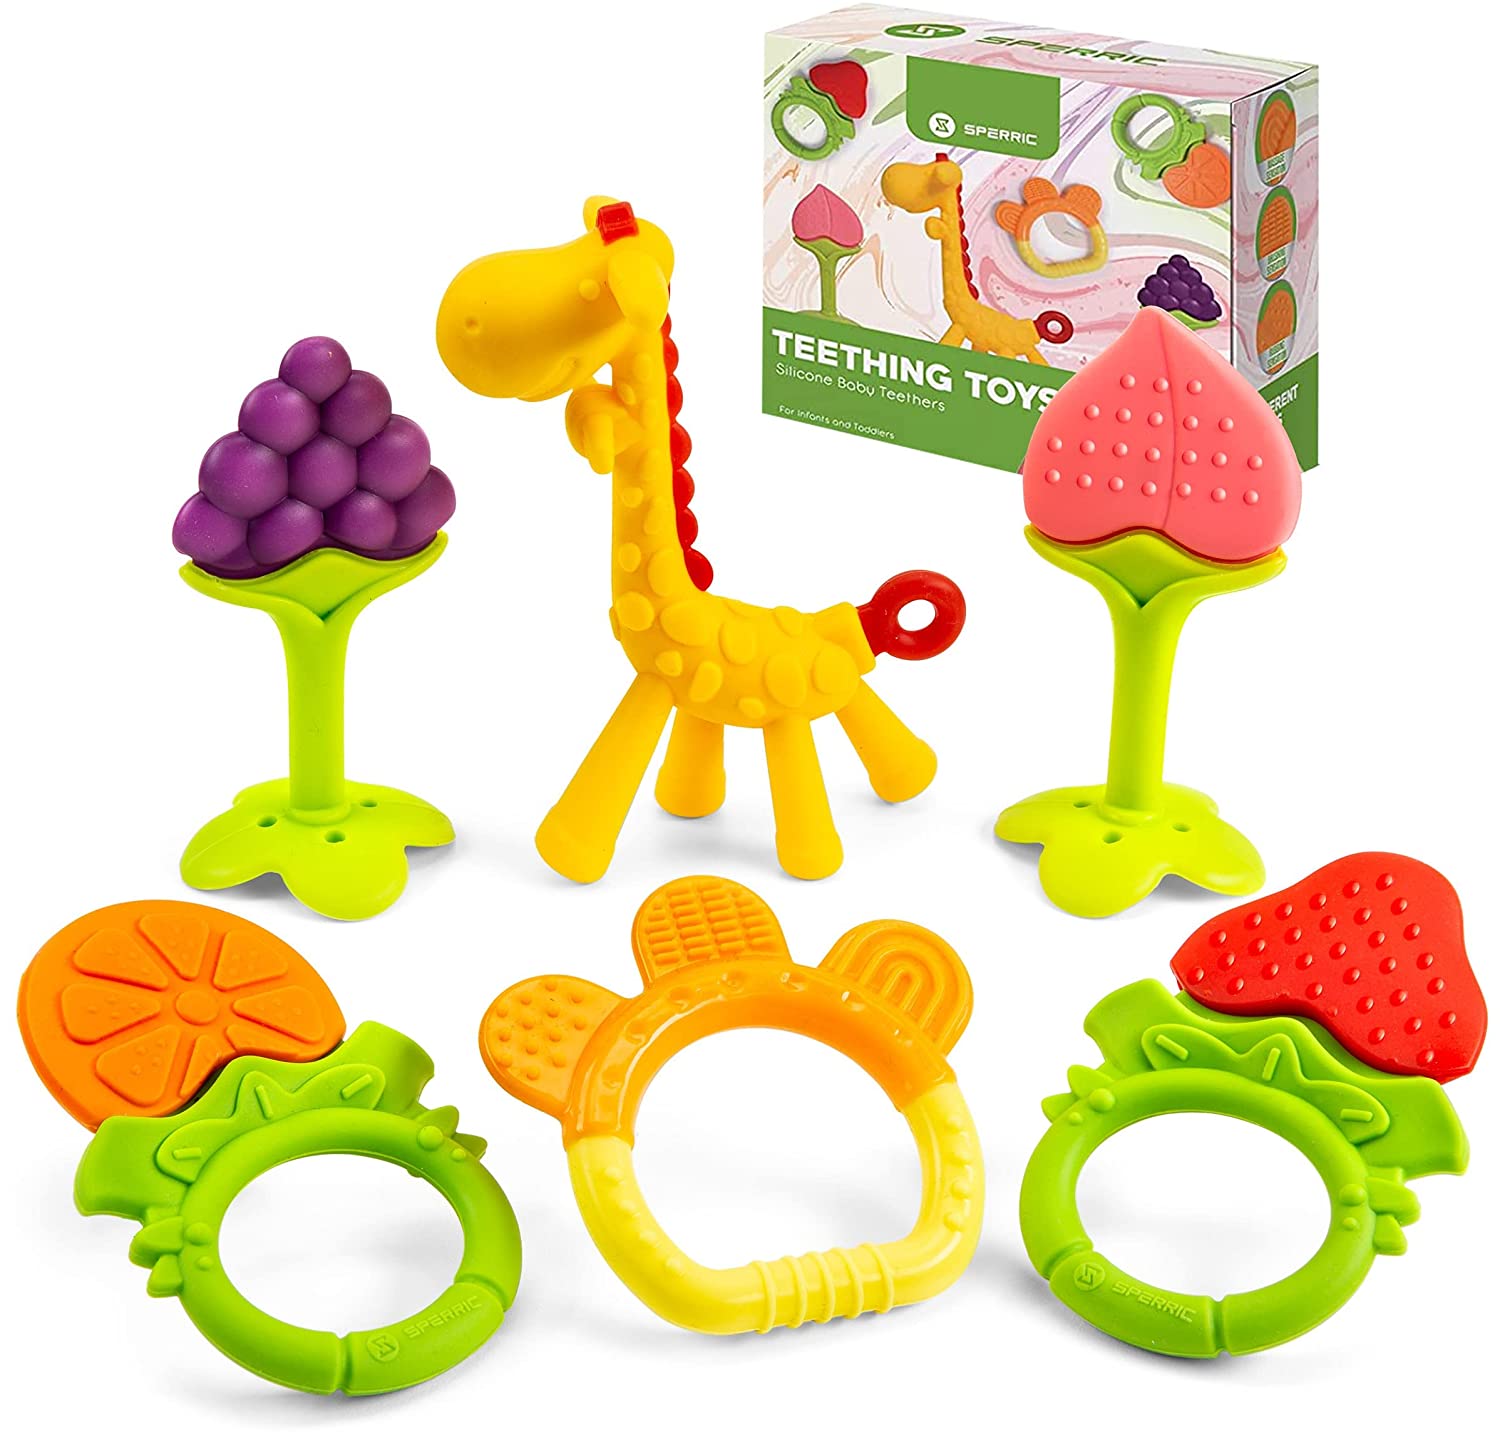 Rattle Teething Ring a 2-in-1 teether and rattle!